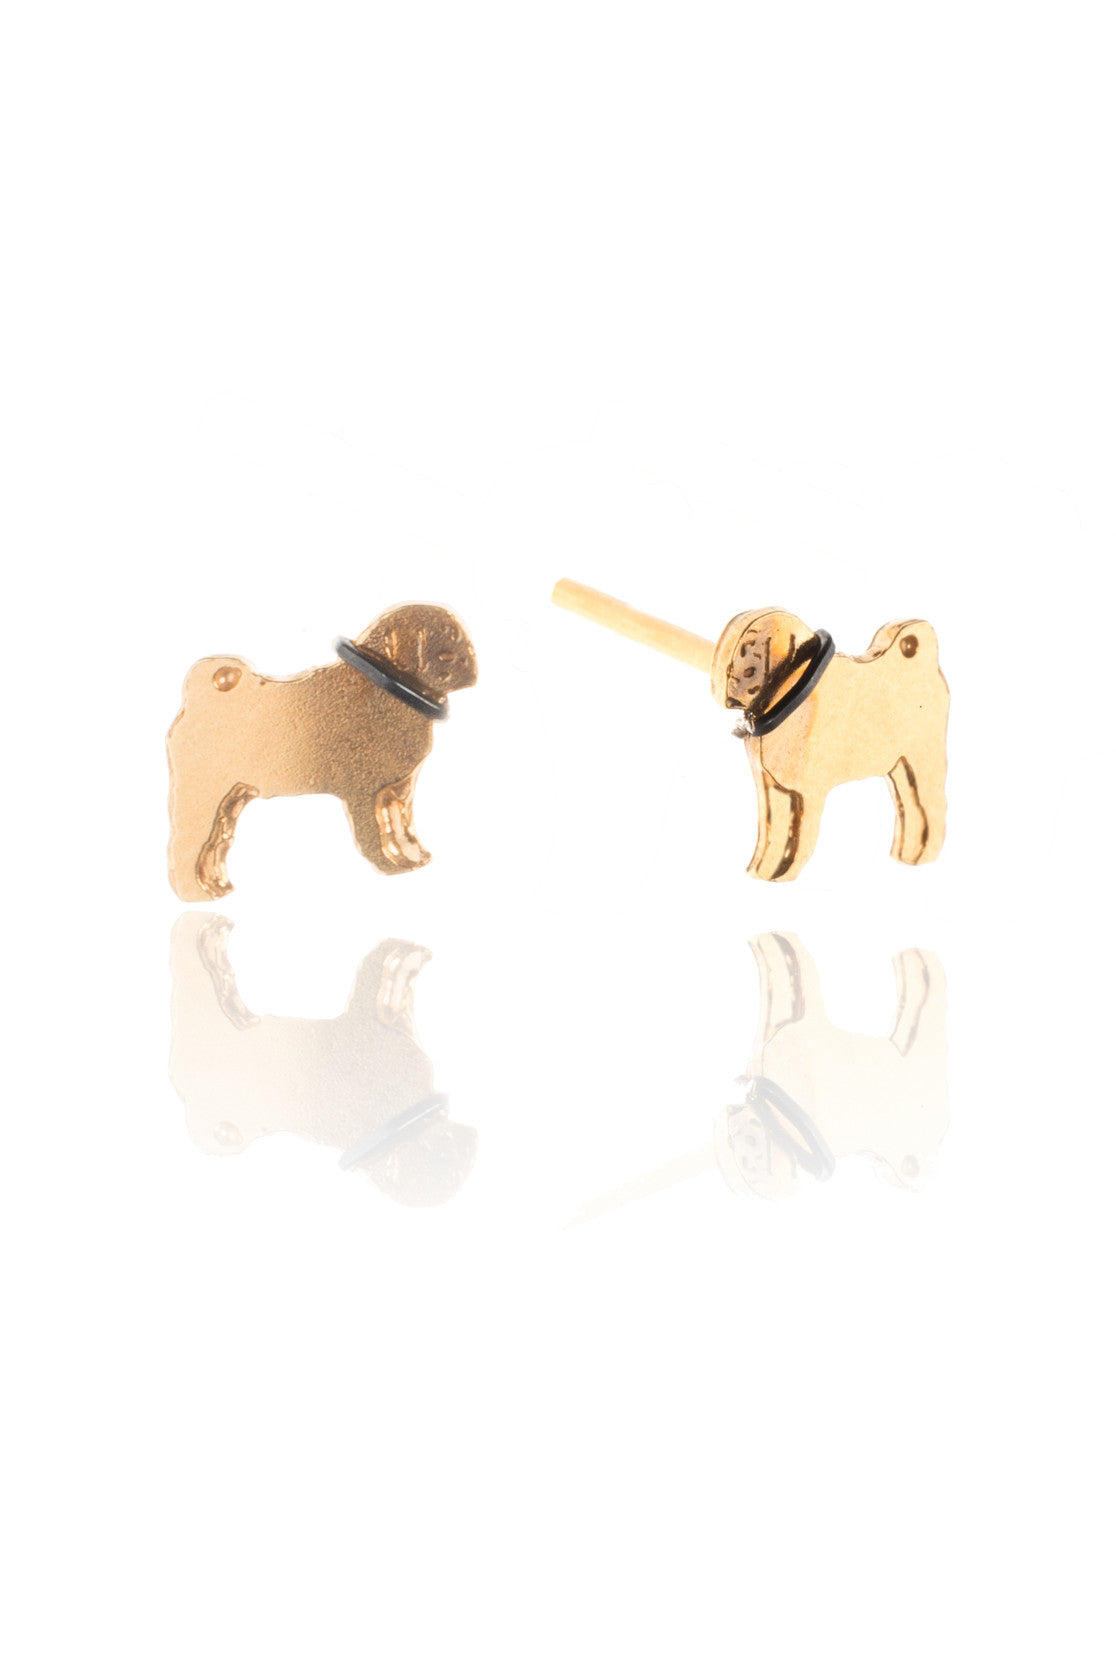 Tiny pug earrings in gold, with a contrasting black collar. 